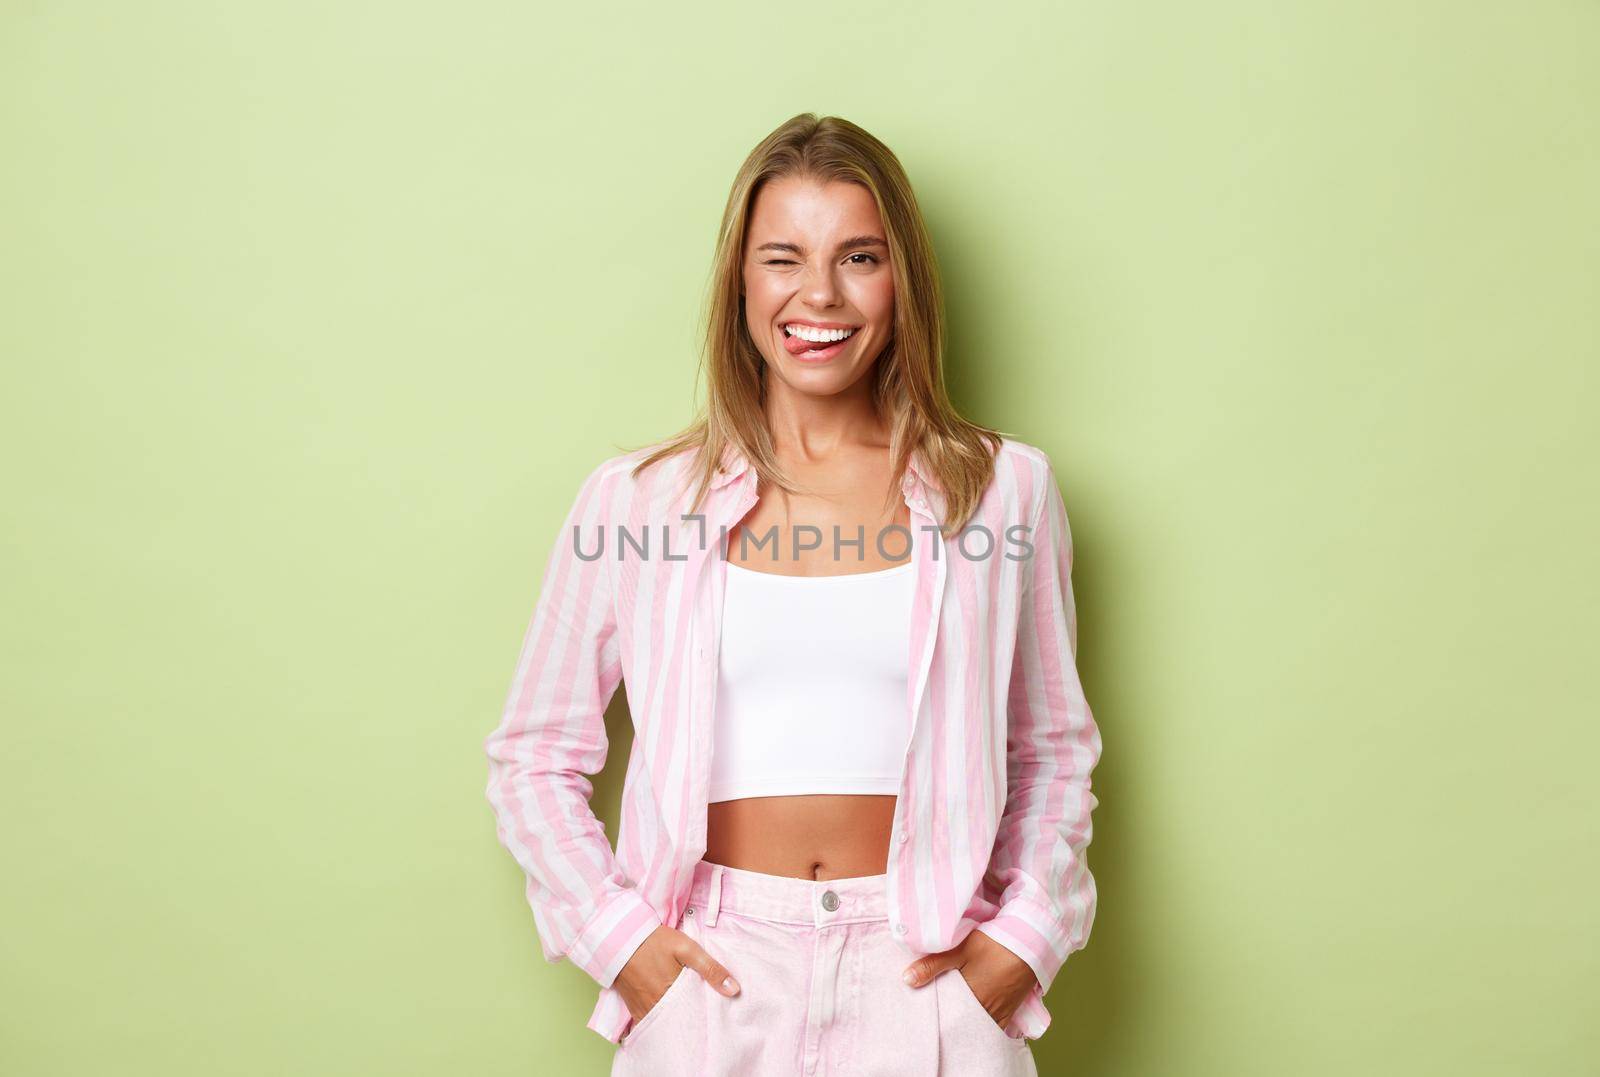 Portrait of sassy modern woman with blond short hair, wearing pink clothing, showing tongue and smiling with perfect white teeth, standing confident over green background.